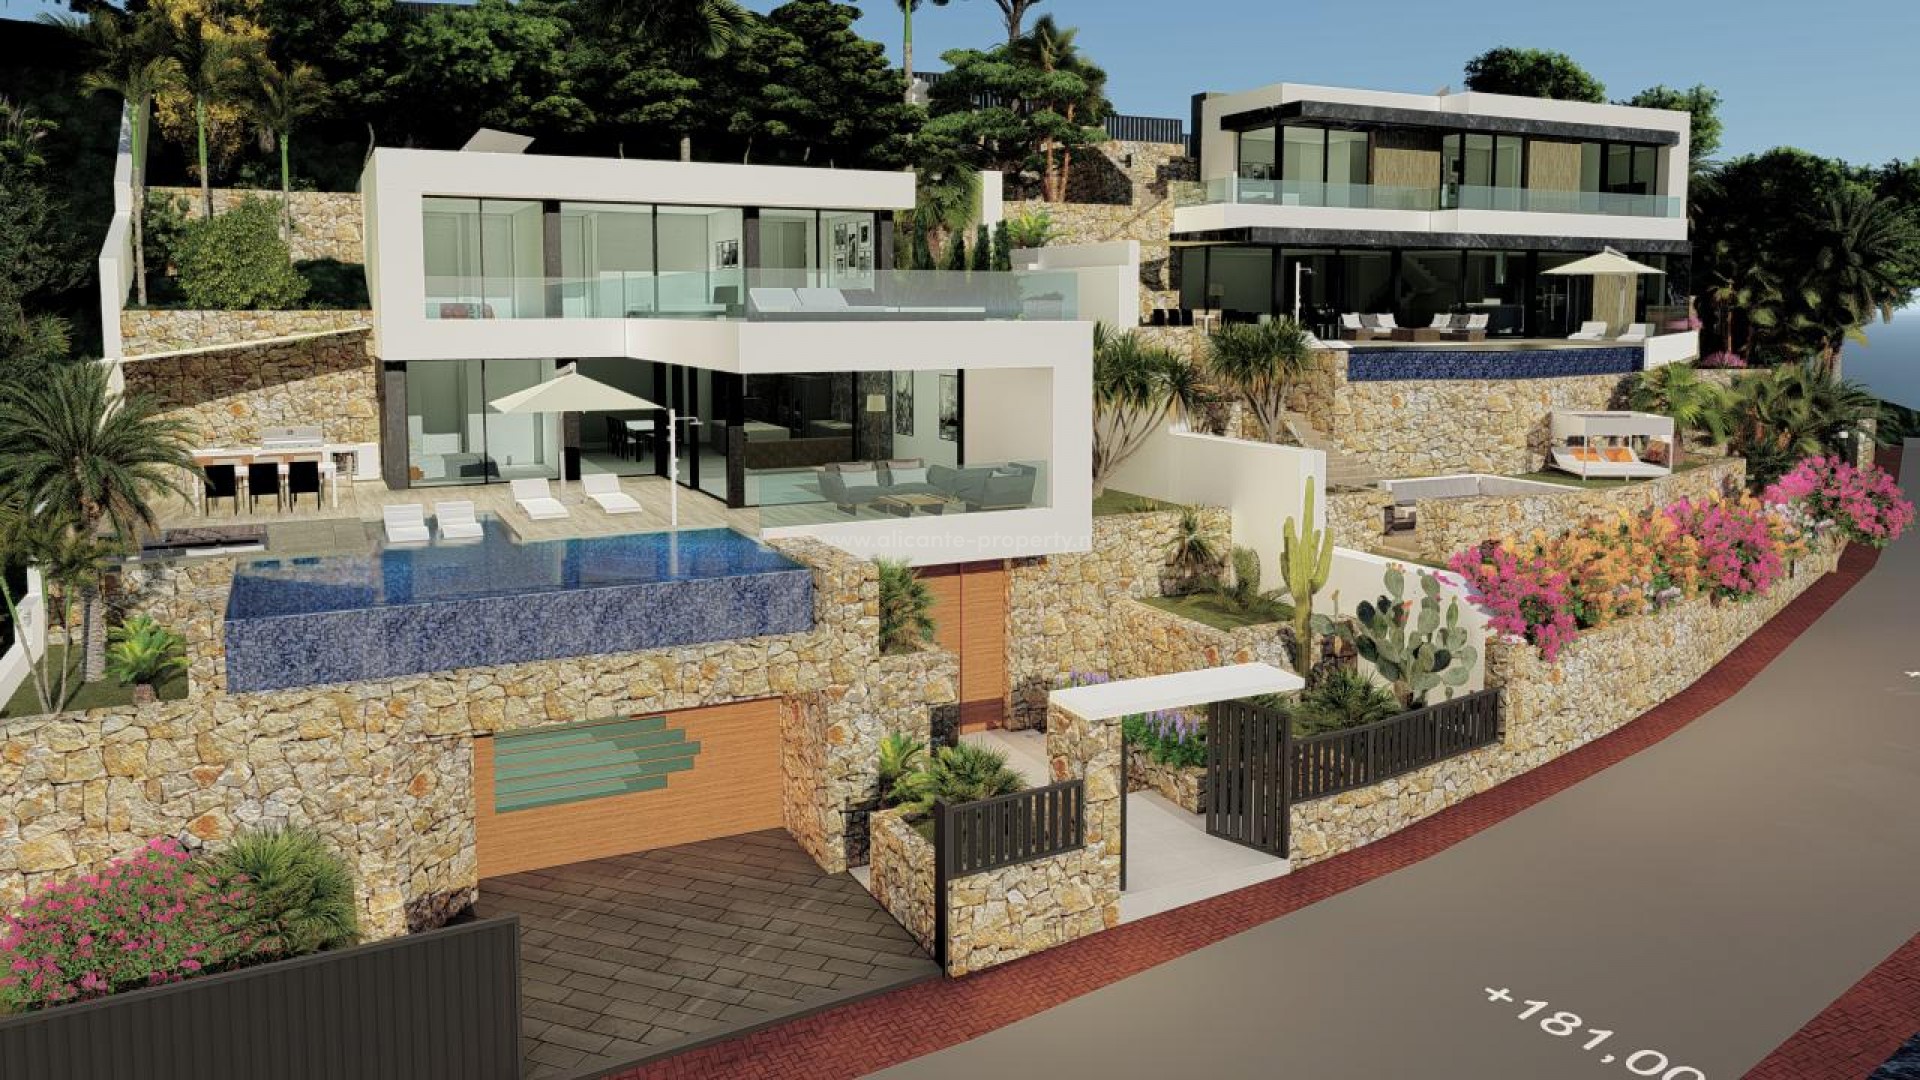 Exclusive luxury villa in Maryvilla, Calpe with spectacular views over the sea and the Penon and Calpe bays. High-tech villa with high-quality materials